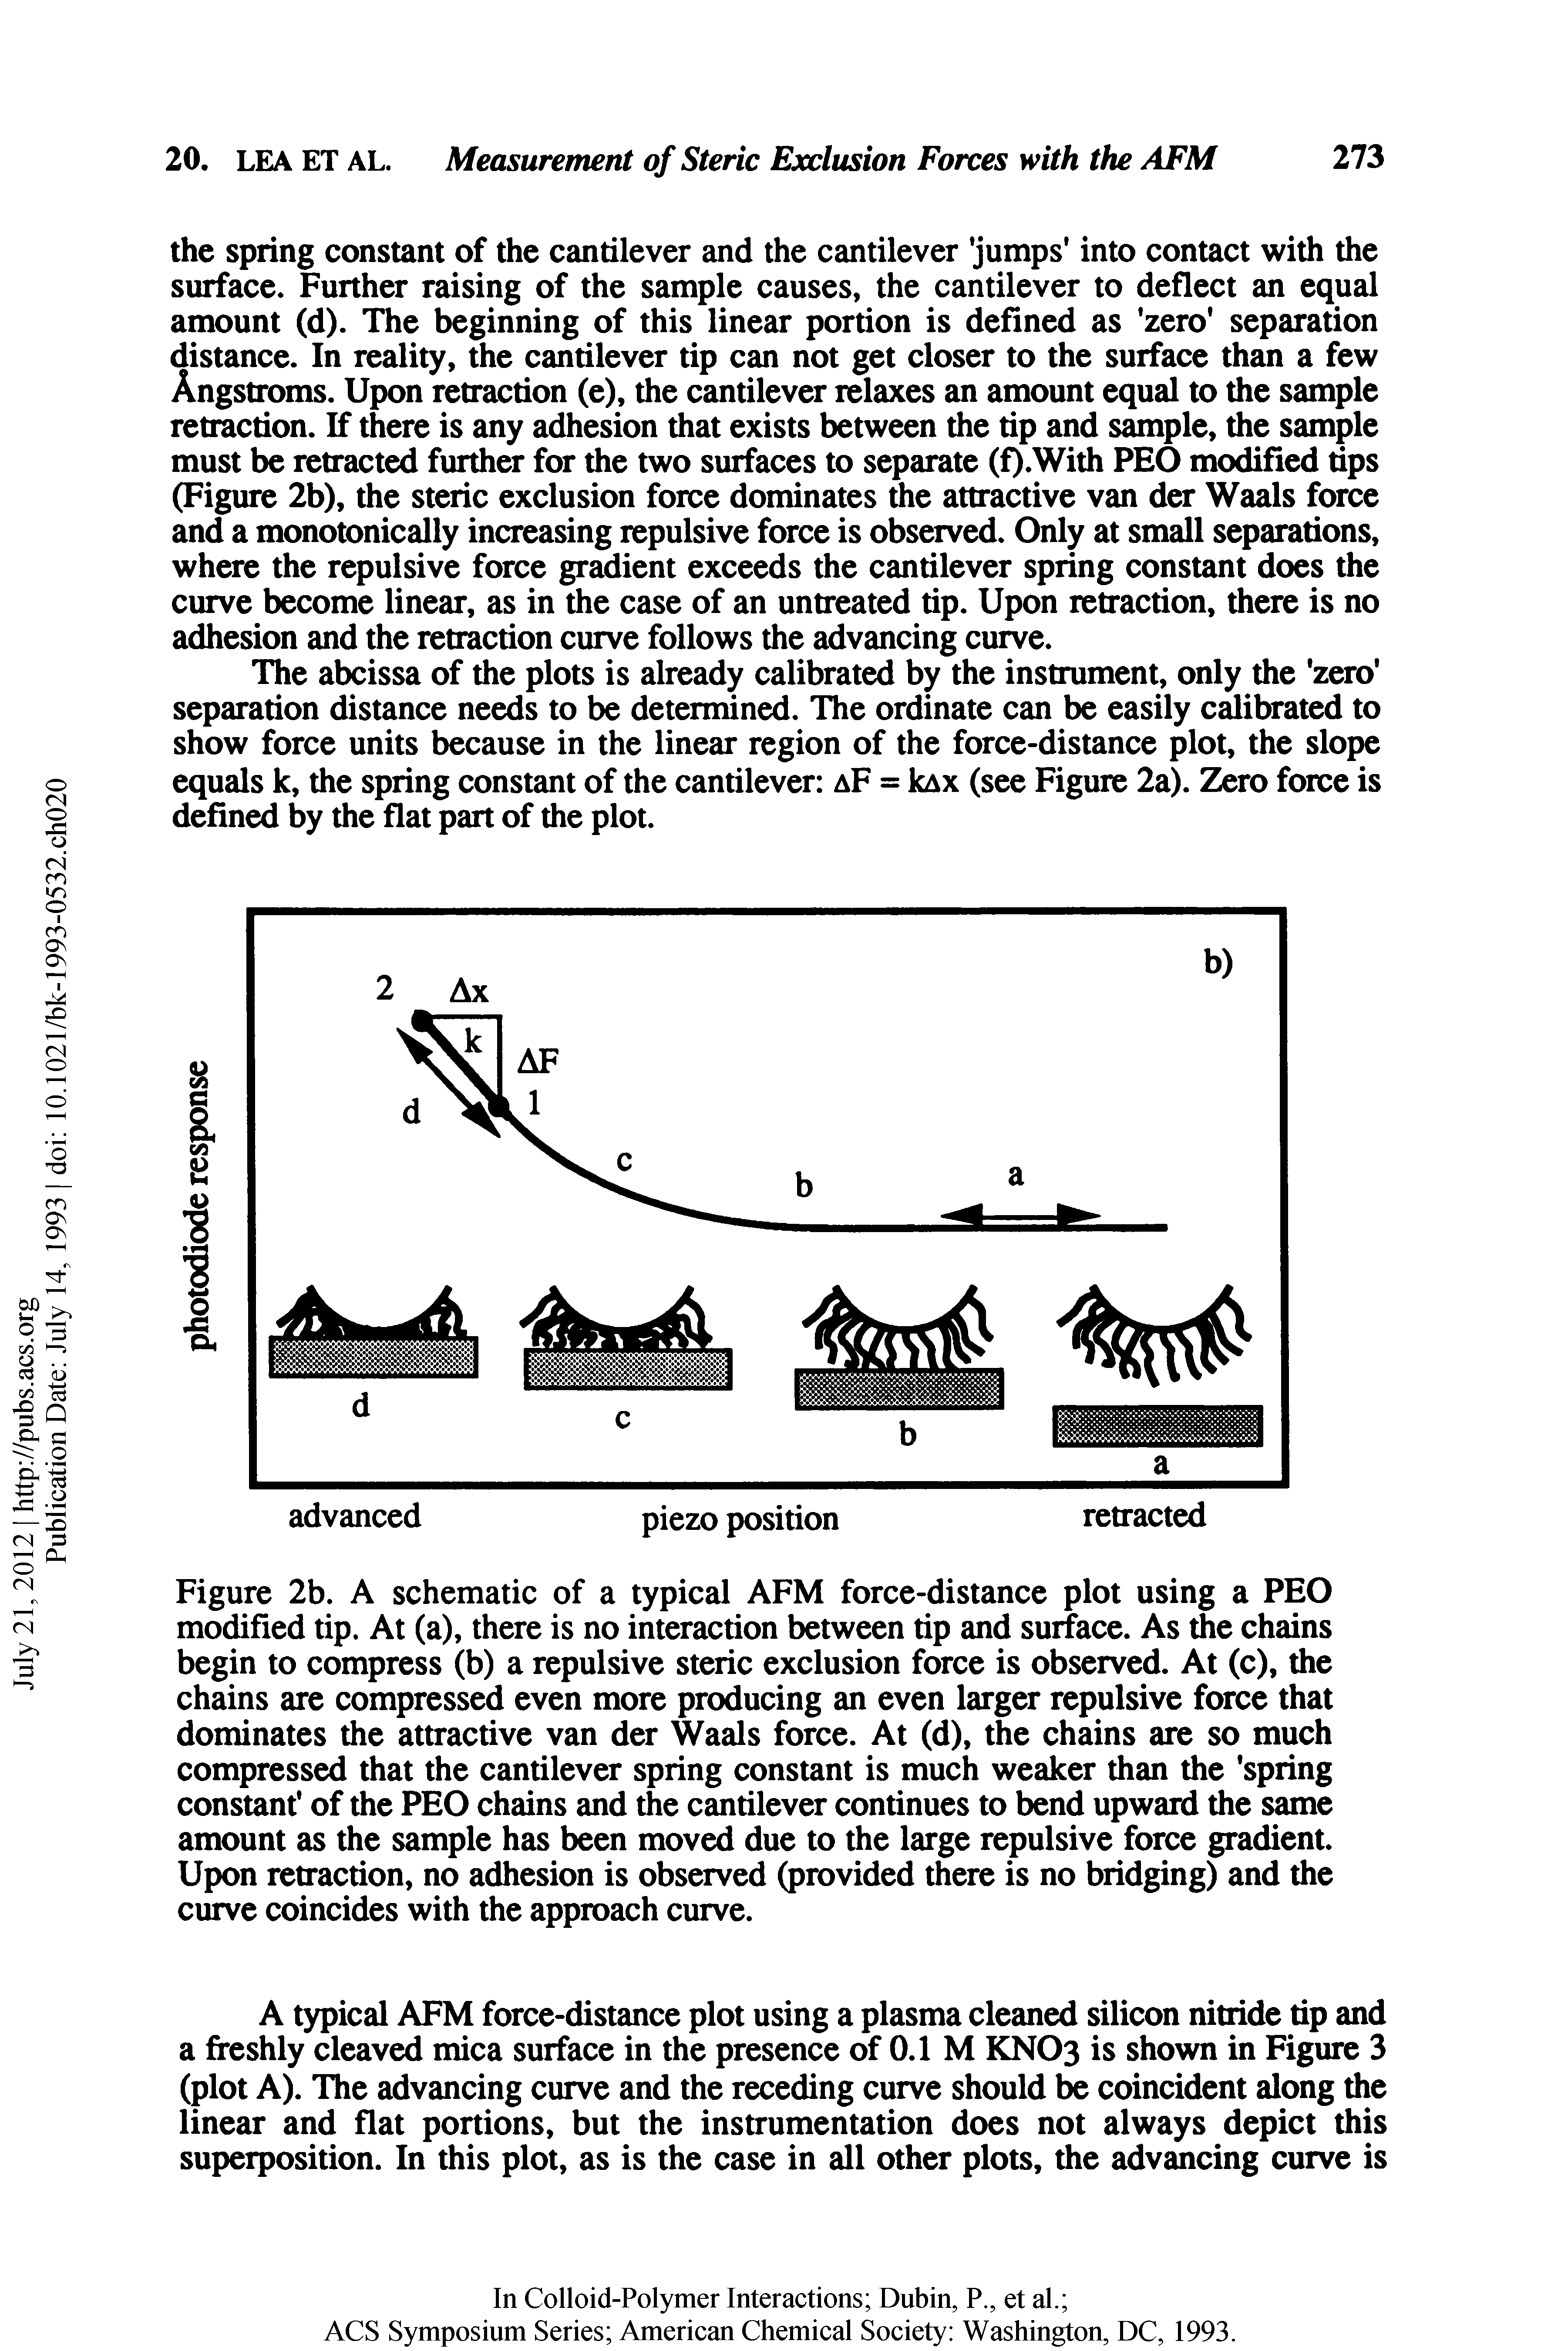 Figure 2b. A schematic of a typical AFM force-distance plot using a PEO modified tip. At (a), there is no interaction between tip and surface. As the chains begin to compress (b) a repulsive steric exclusion force is observed. At (c), the chains are compressed even more producing an even larger repulsive force that dominates the attractive van der Waals force. At (d), the chains arc so much compressed that the cantilever spring constant is much weaker than the spring constant of the PEO chains and the cantilever continues to bend upward the same amount as the sample has been moved due to the large repulsive force gradient. Upon retraction, no adhesion is observed (provided there is no bridging) and the curve coincides with the approach curve.